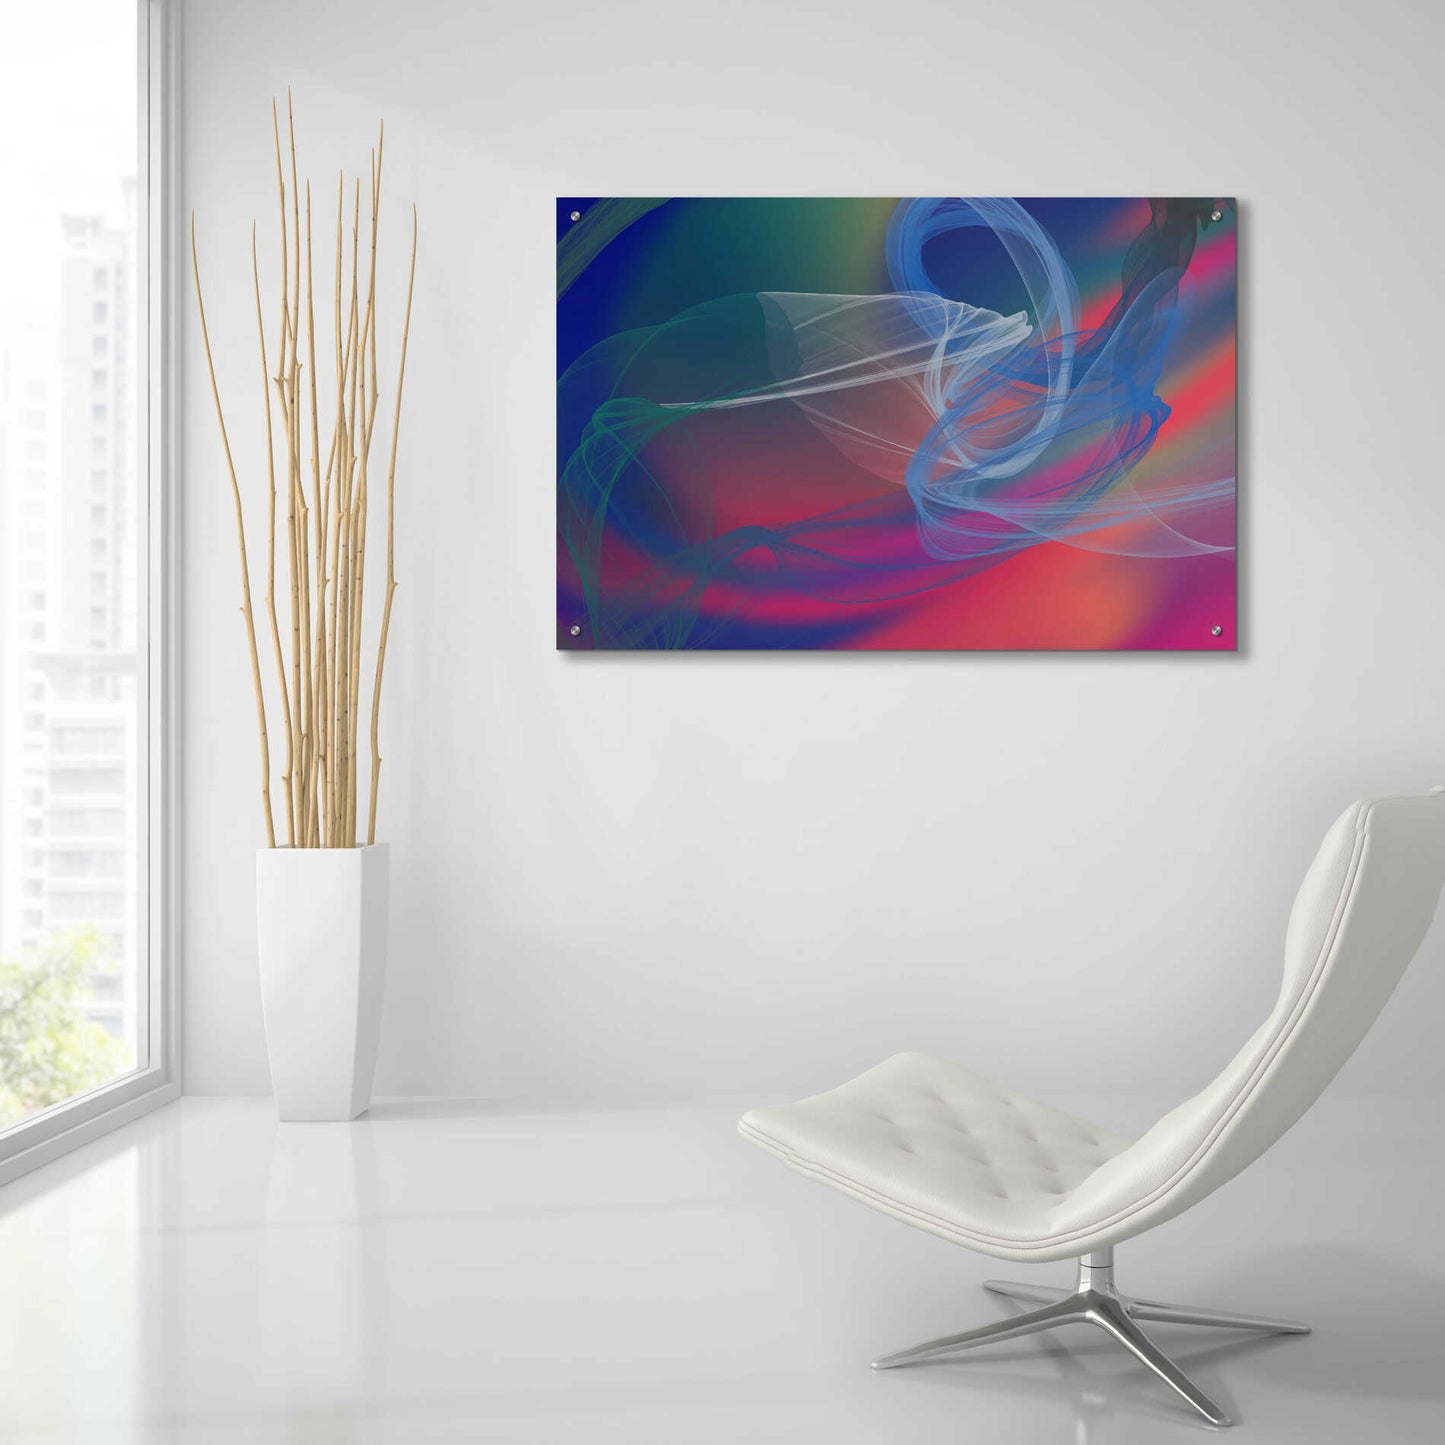 Epic Art 'Inverted Color In The Lines 4' by Irena Orlov Acrylic Glass Wall Art,36x24